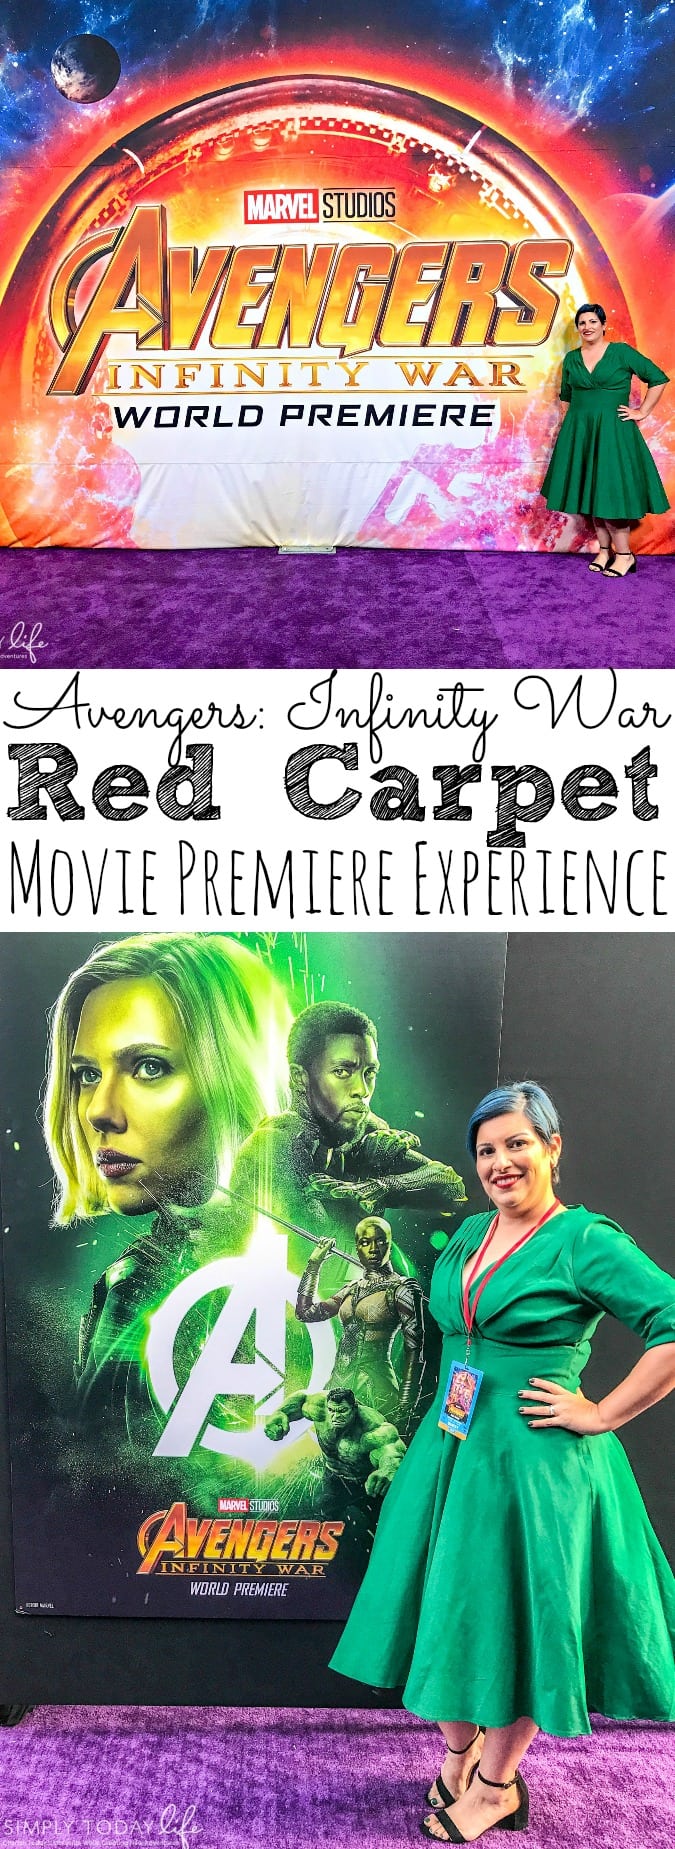 Avengers Infinity War Red Carpet Premiere Experience - simplytodaylife.com